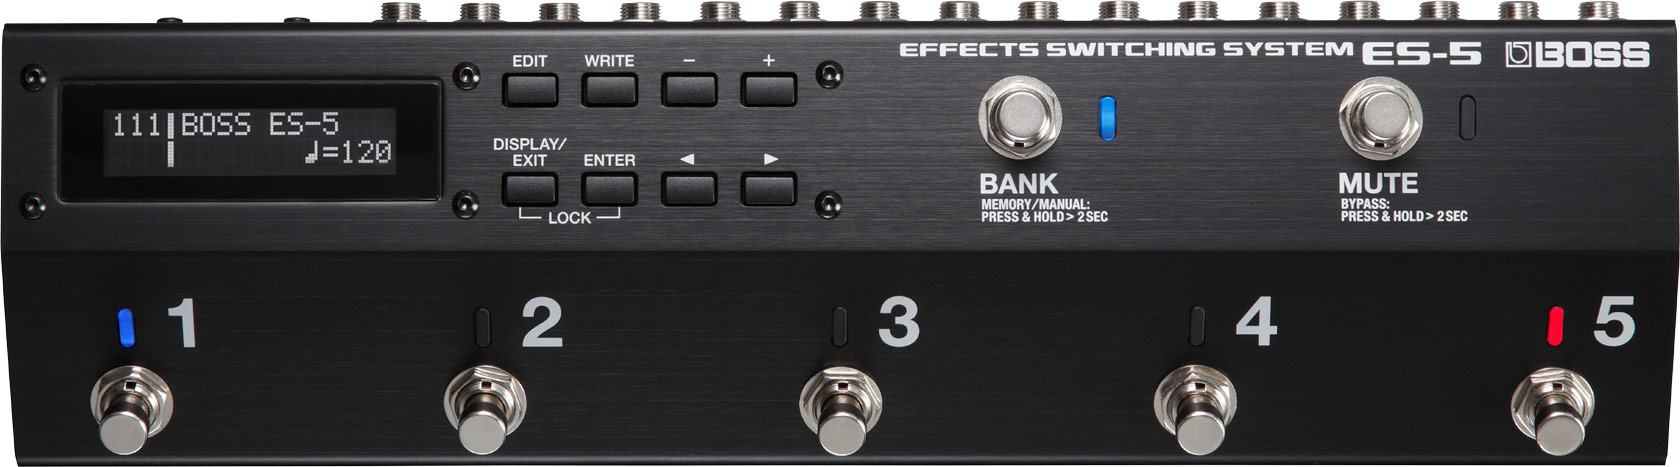 BOSS / ES-5 Effects Switching System 5ループスイッチャー ...